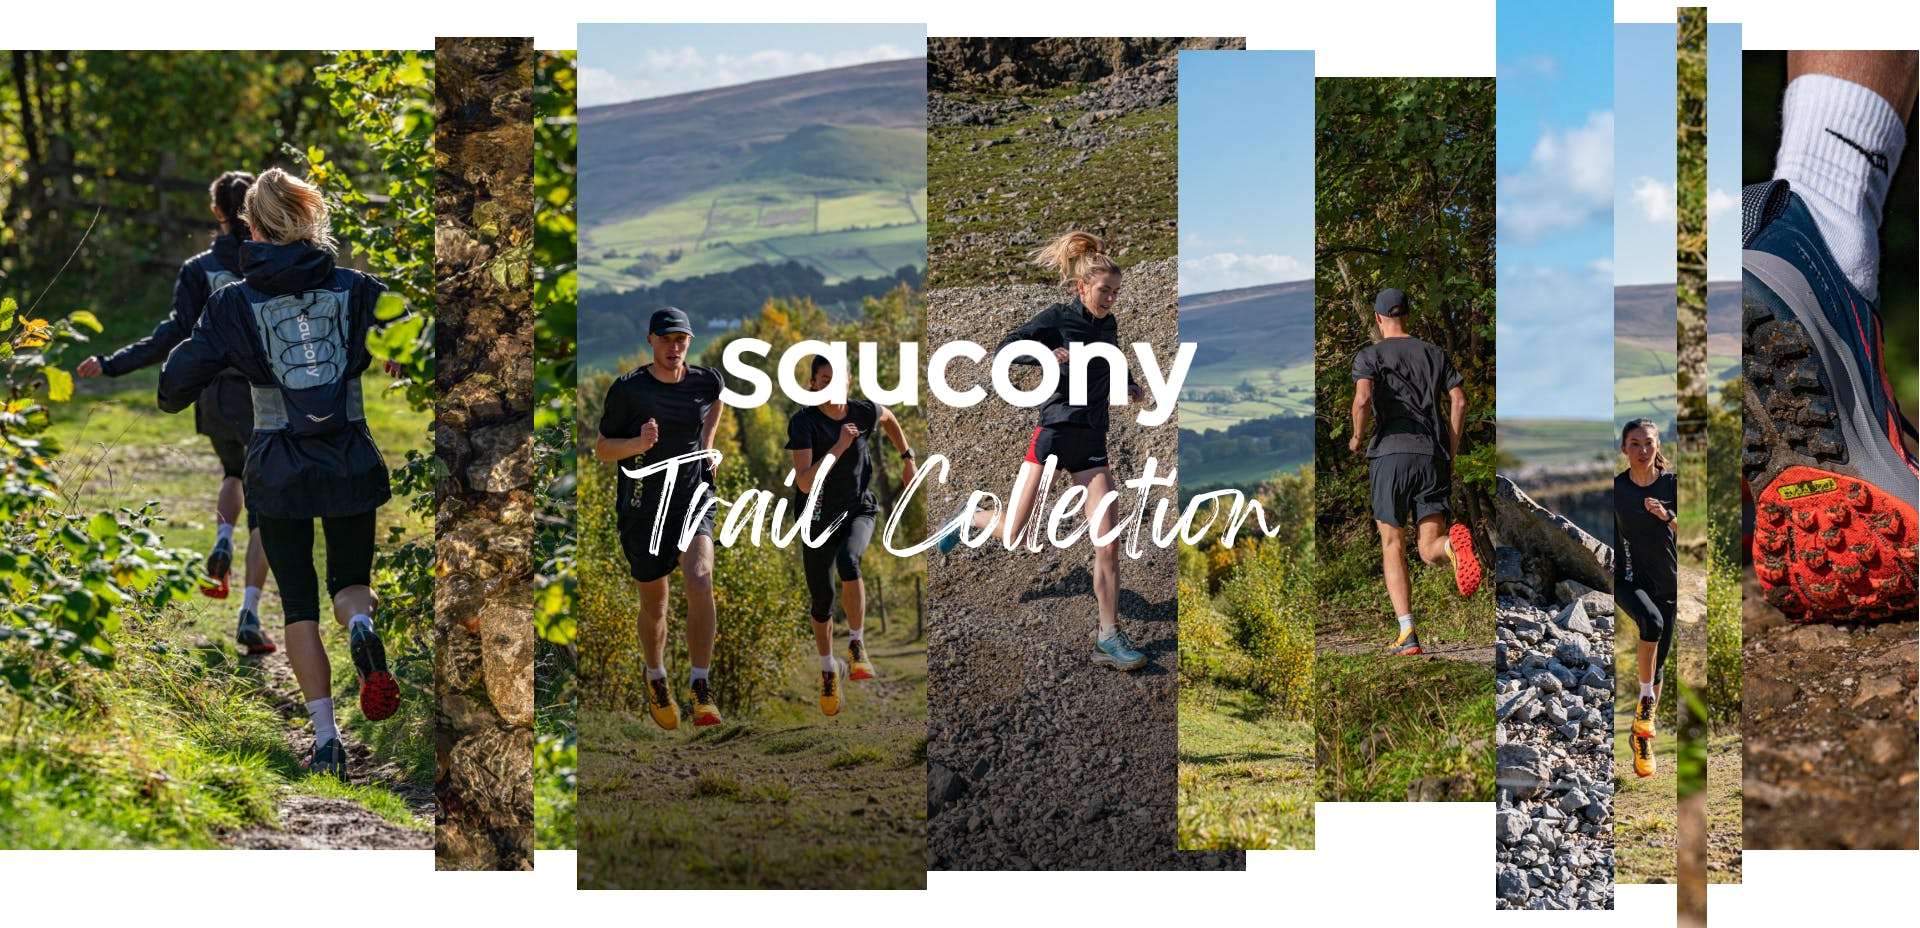 Saucony Trail collection